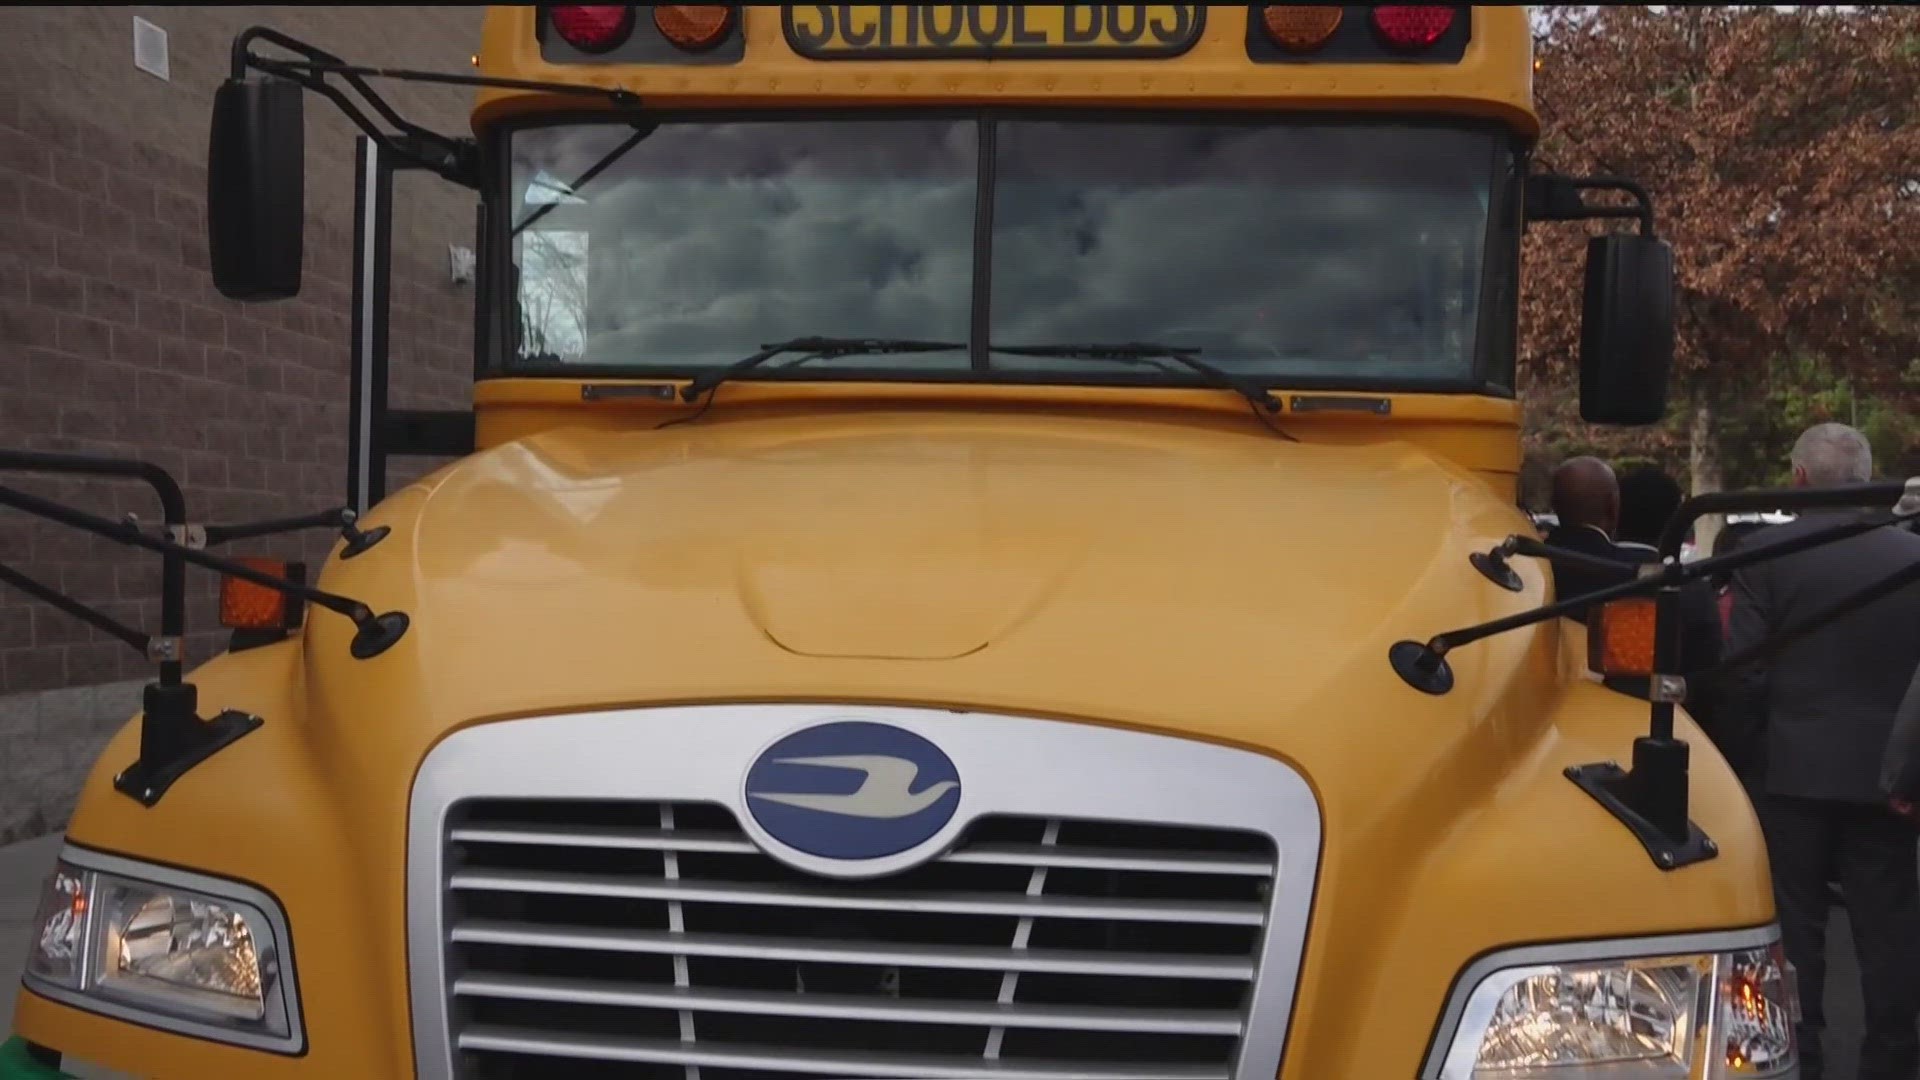 DeKalb County schools will receive 25 clean buses along with charging stations. This is from the Environmental Protection Agency's latest round of funding.